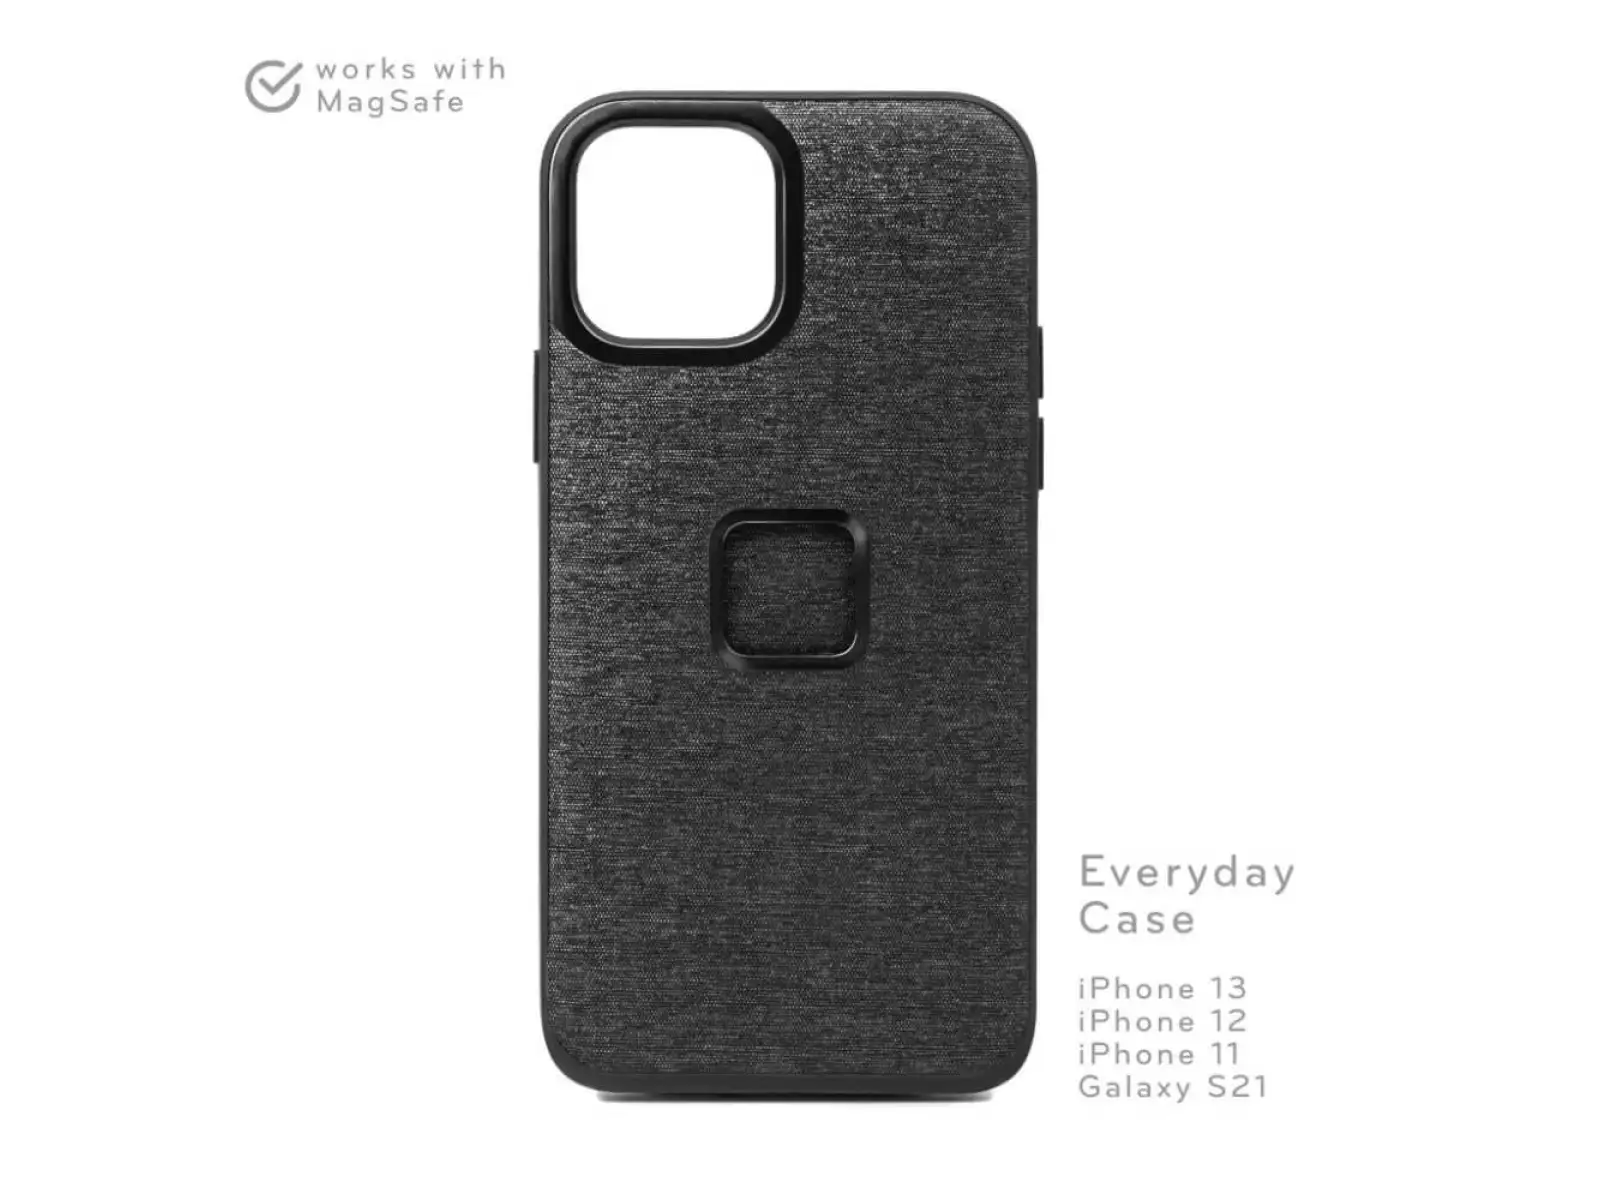 Peak Design Mobile Everyday Case iPhone 12 Pro Max obal na mobil Charcoal